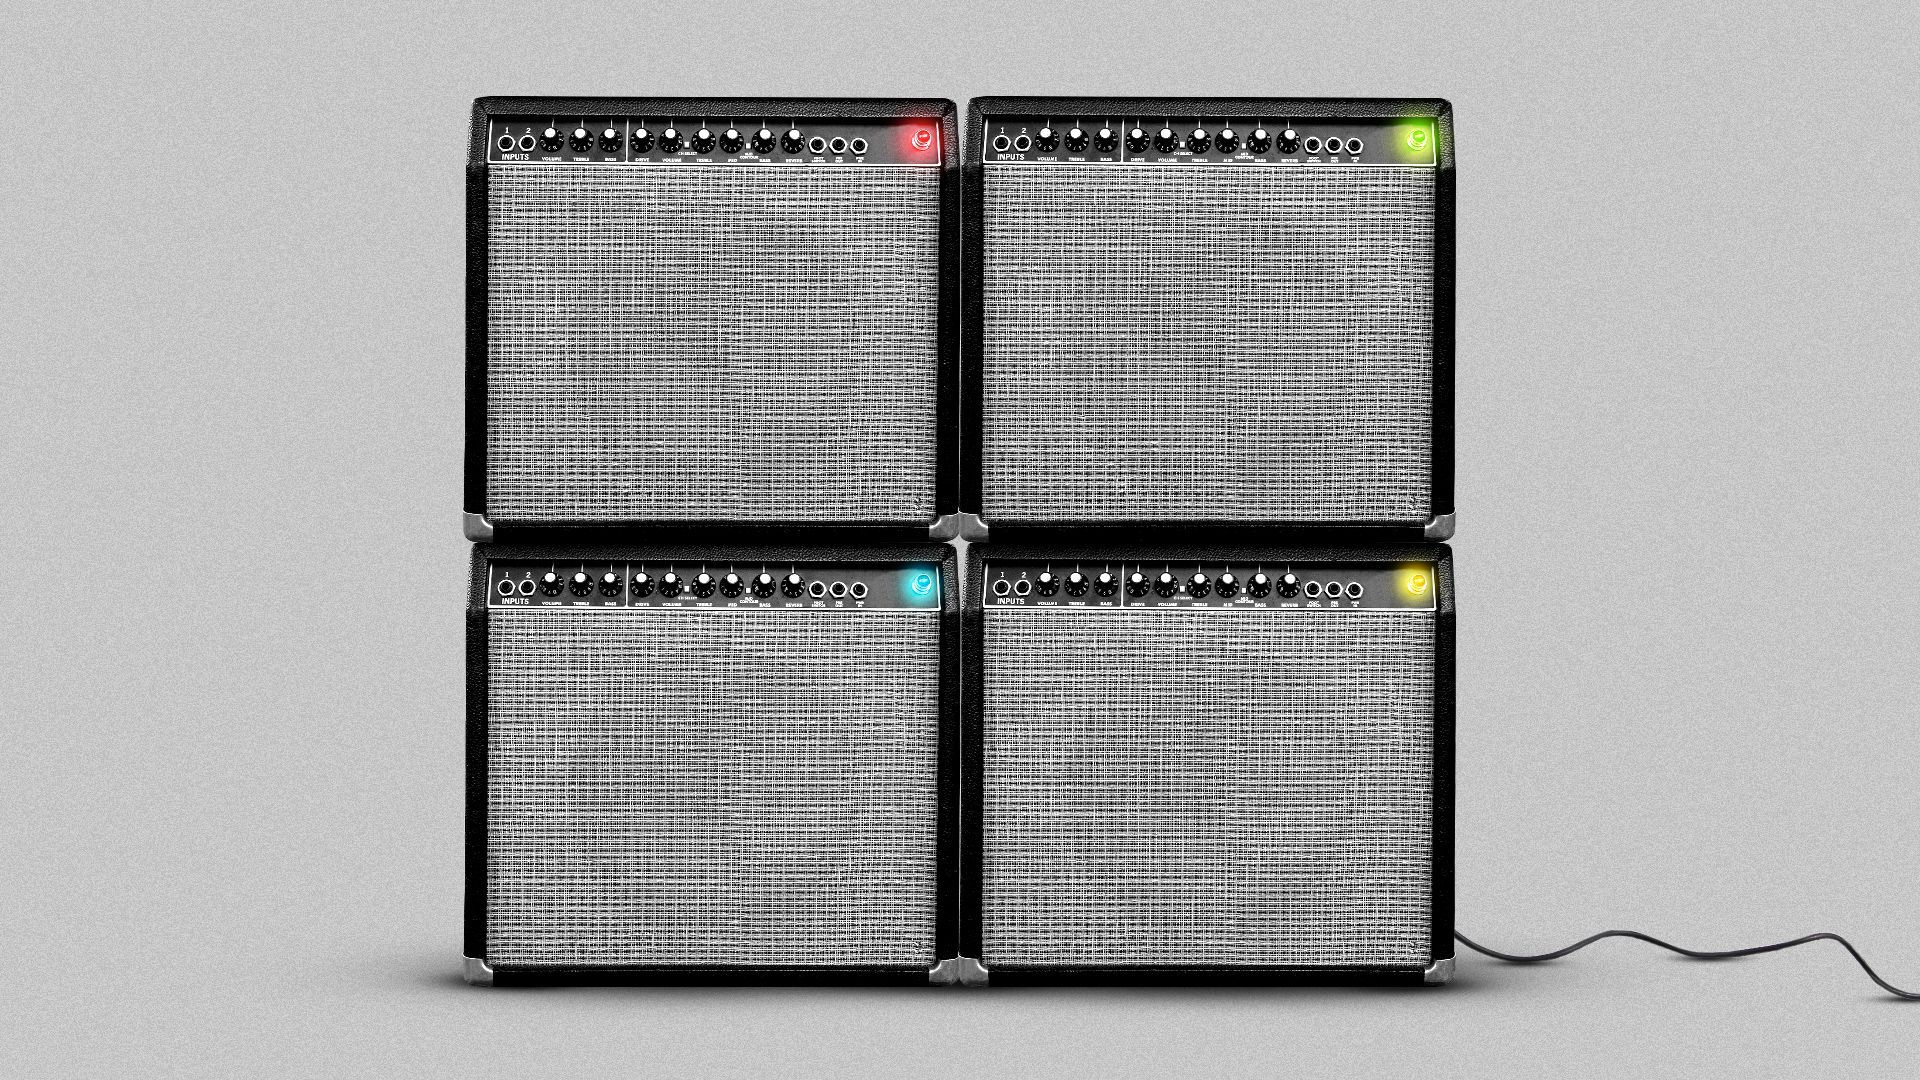 Illustration of four speakers/amplifiers arranged in the shape of the Windows logo. 